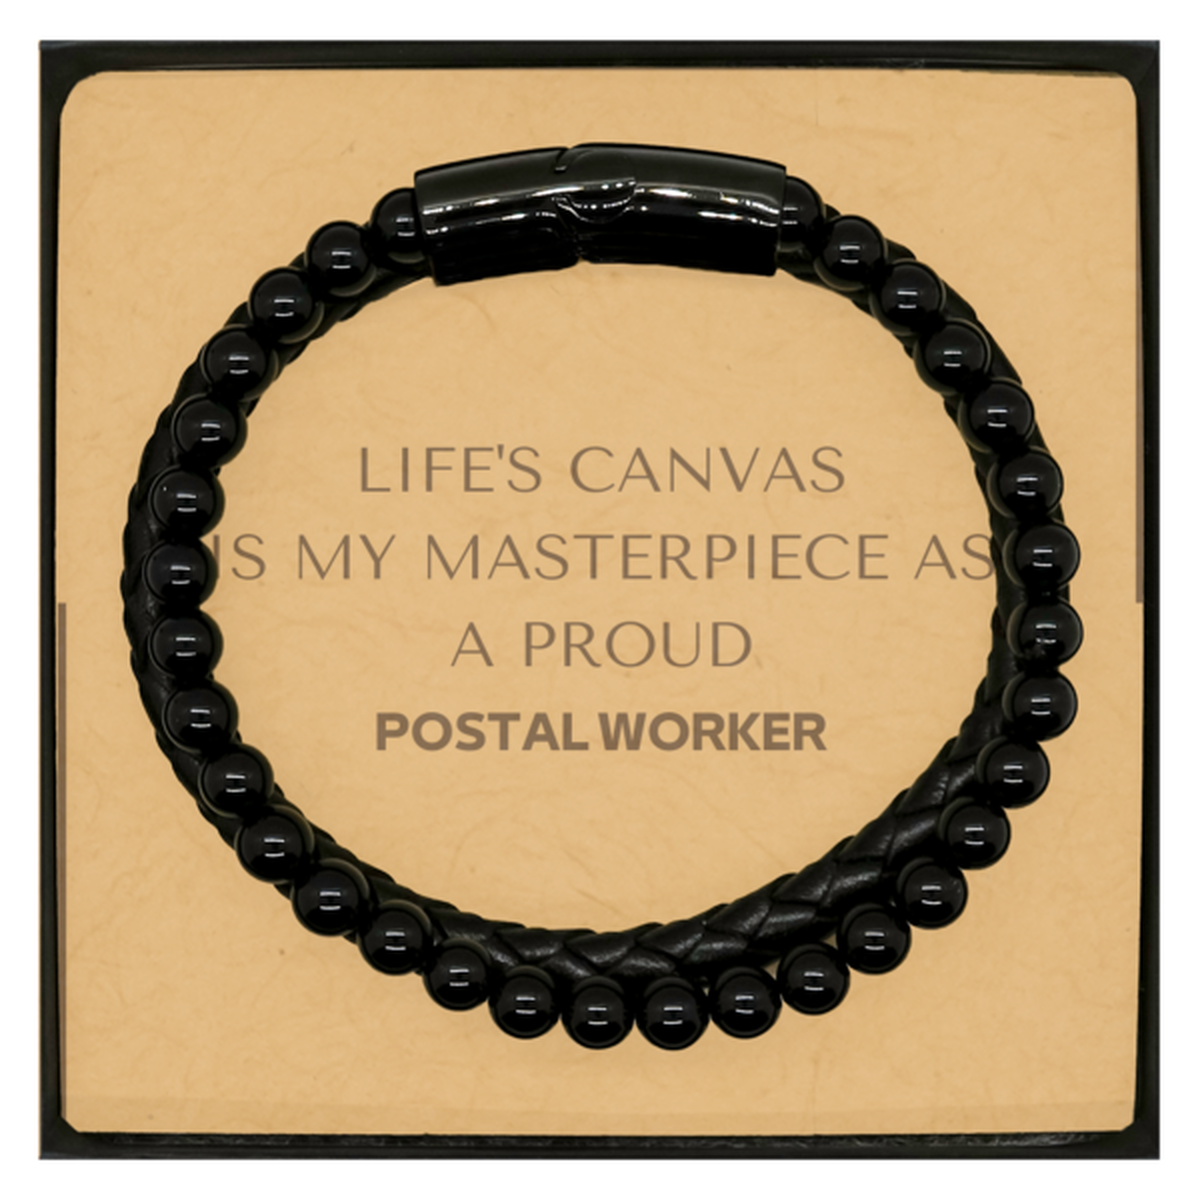 Proud Postal Worker Gifts, Life's canvas is my masterpiece, Epic Birthday Christmas Unique Stone Leather Bracelets For Postal Worker, Coworkers, Men, Women, Friends